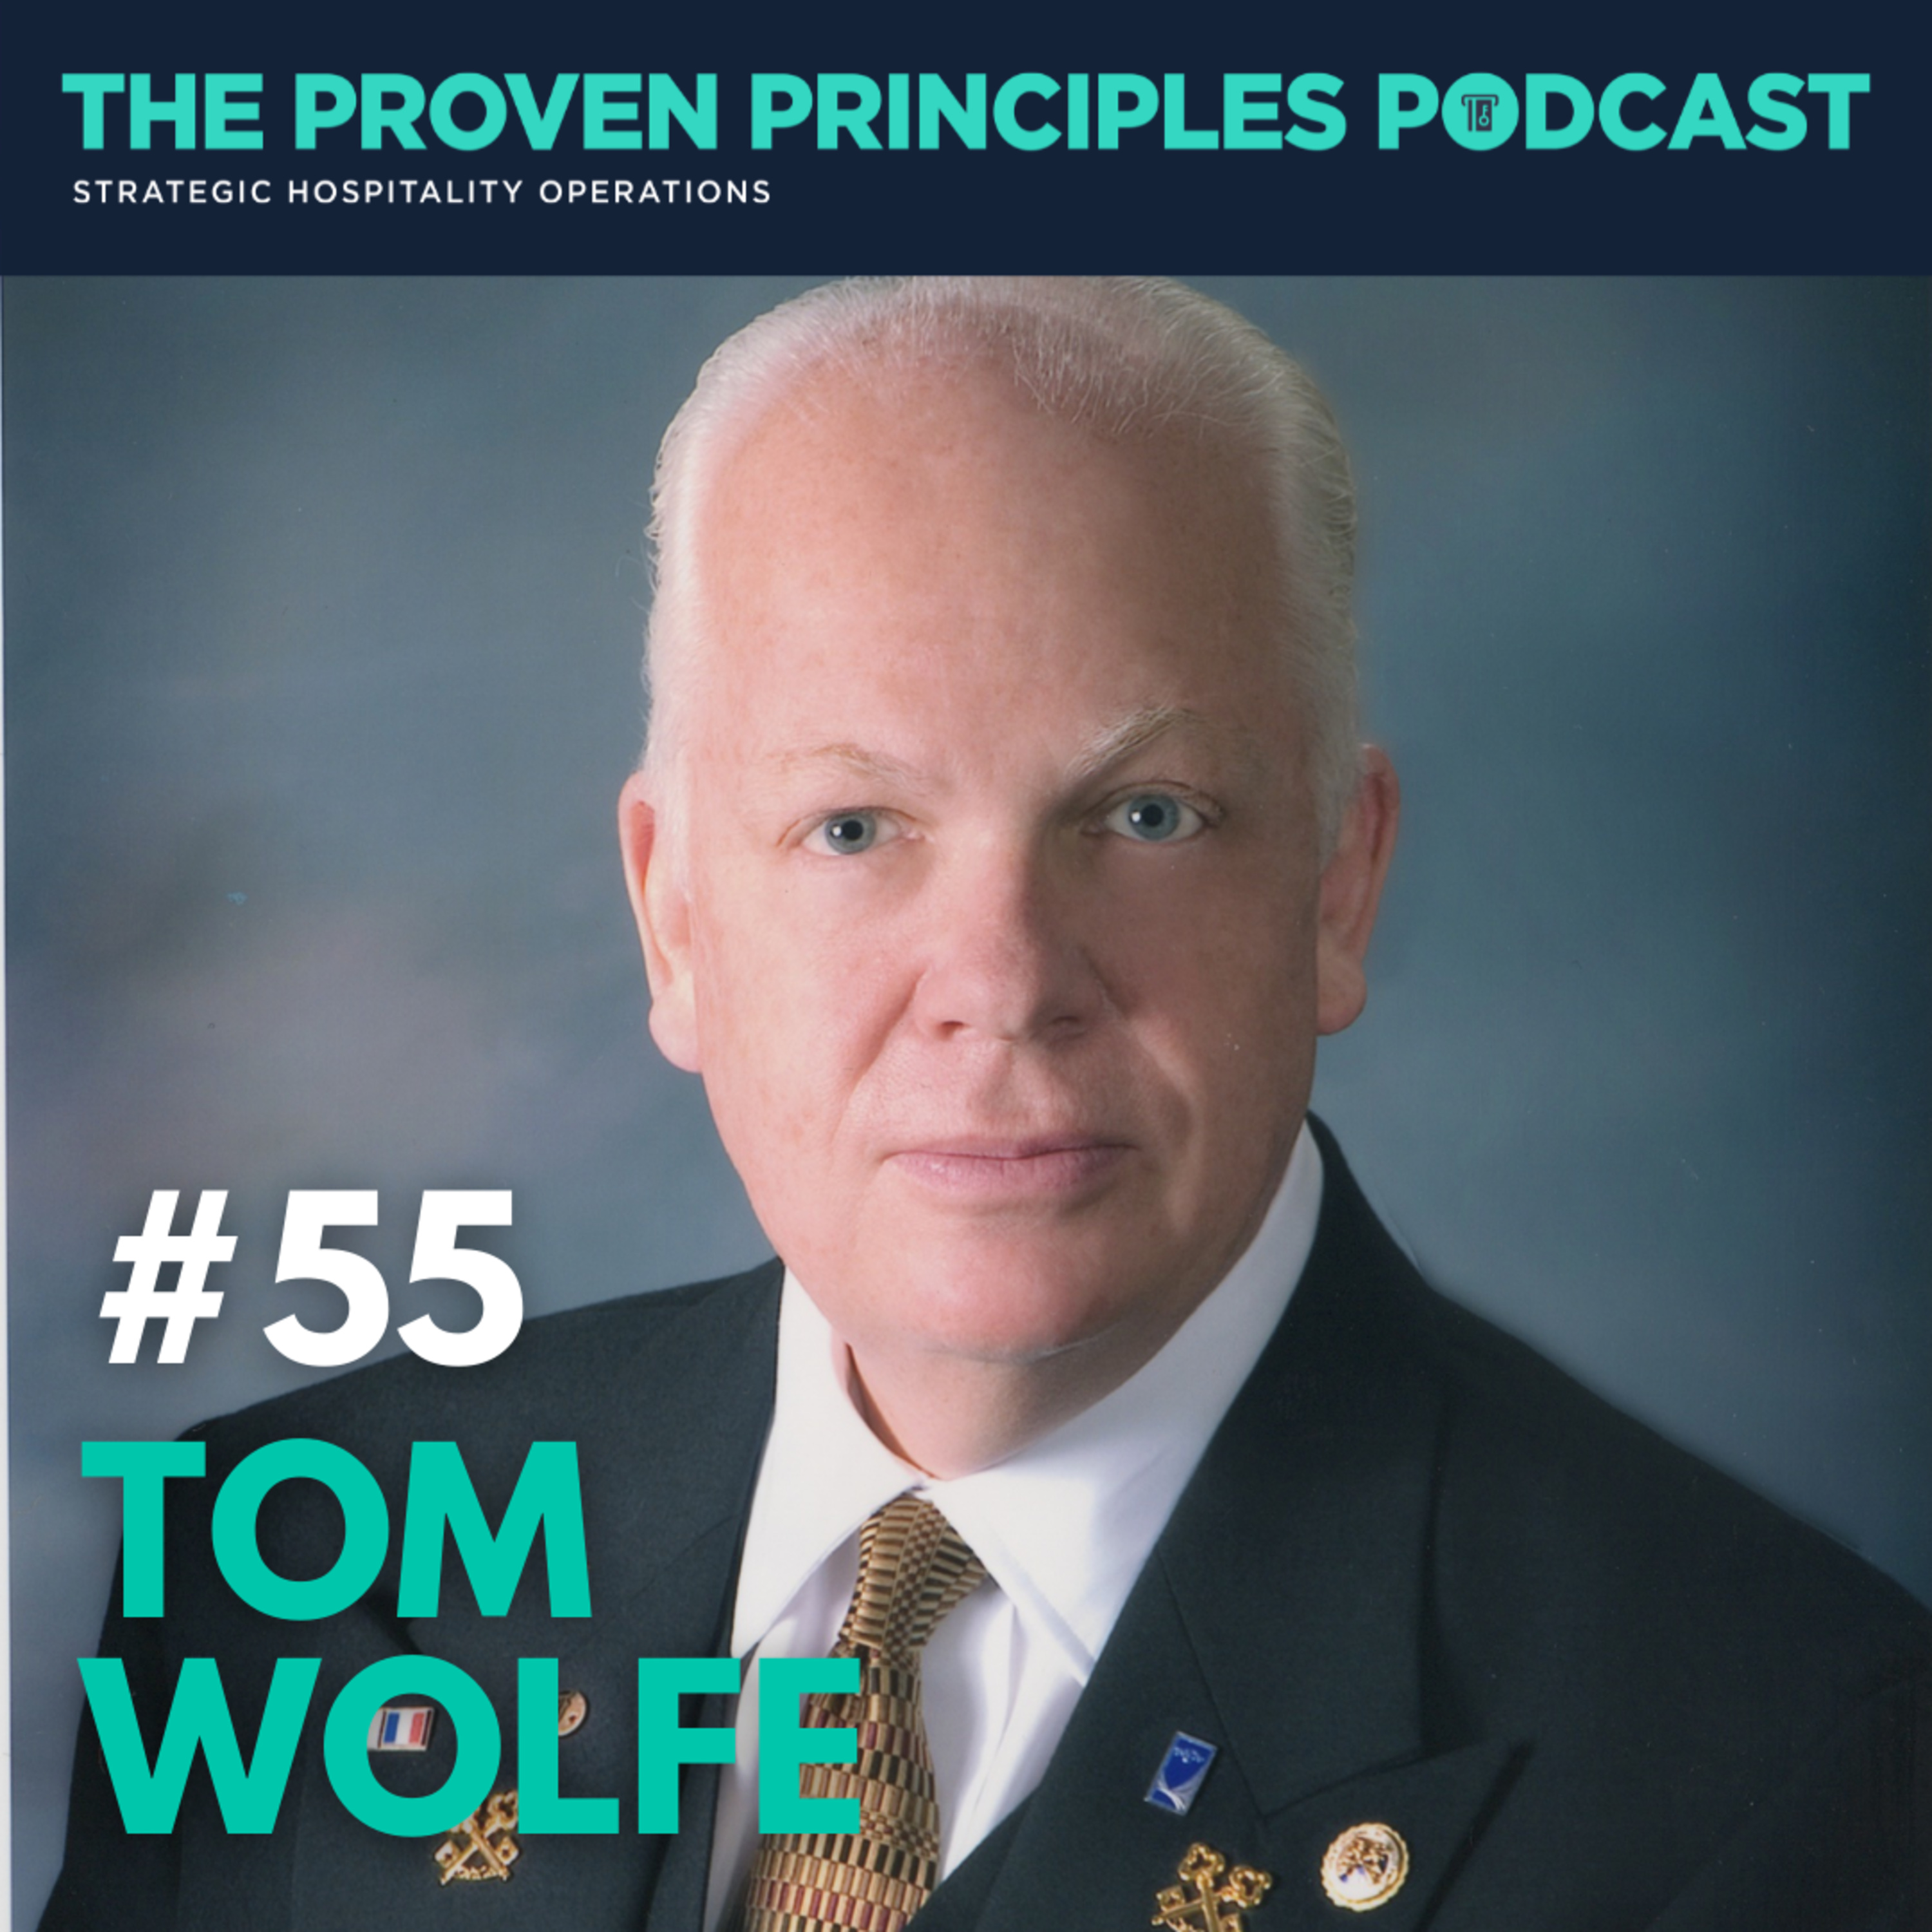 The Past, Present and Future of the Concierge, Tom Wolfe, America's First  Concierge | The Proven Principles Hospitality Podcast